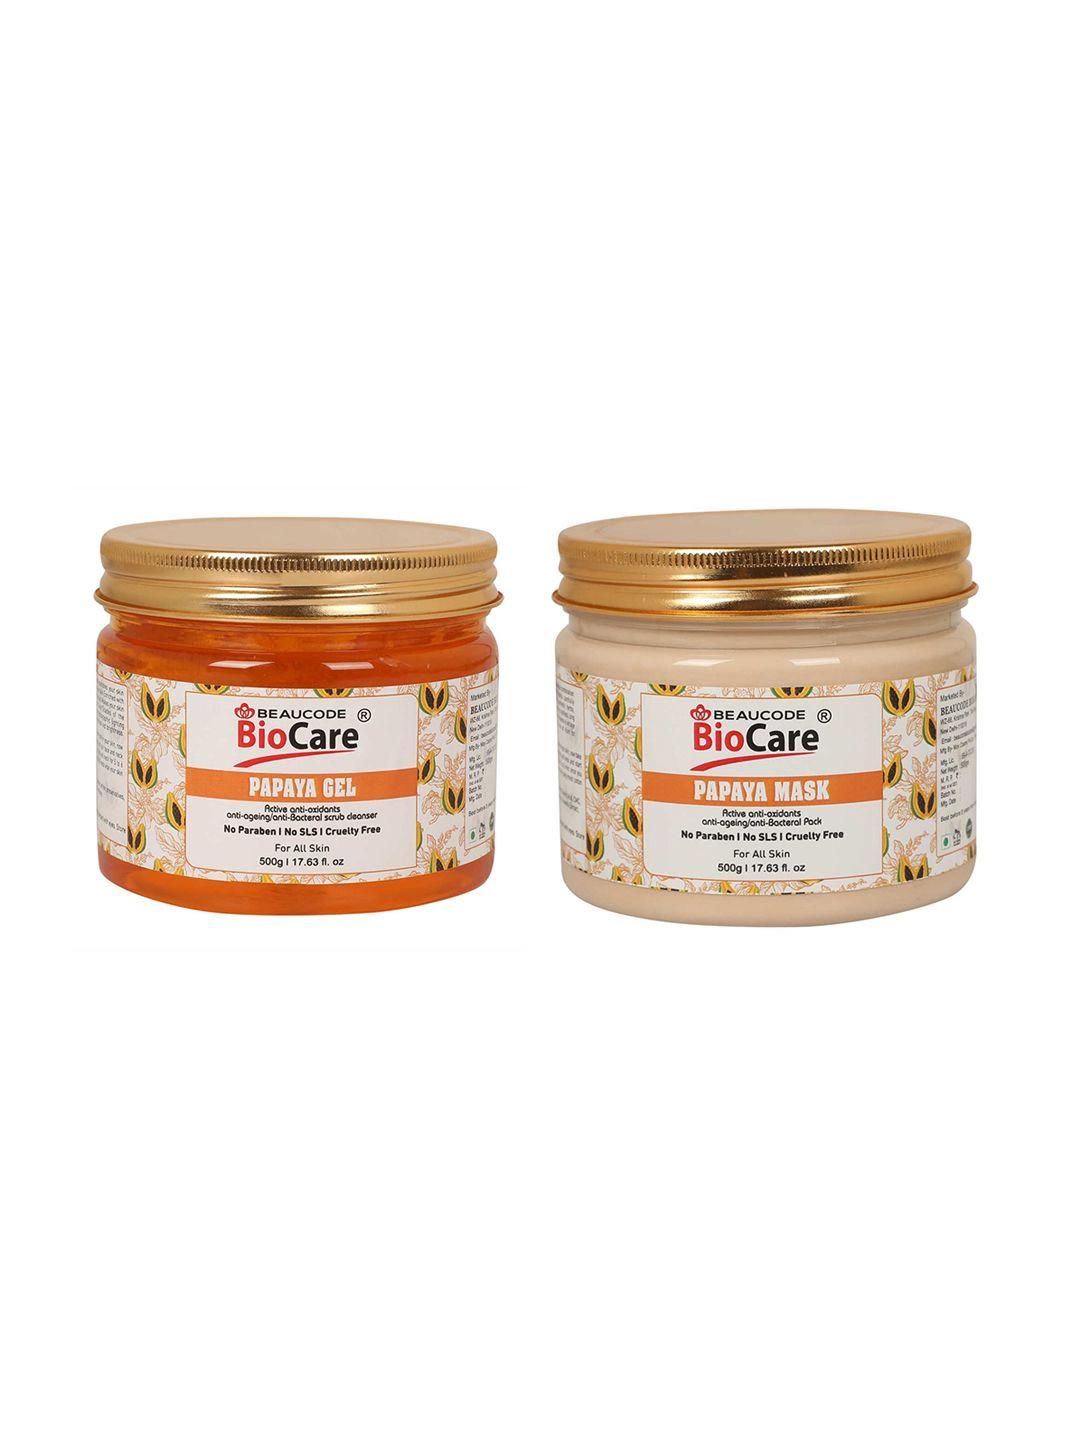 beaucode biocare set of 2  papaya face and body gel and mask 1kg